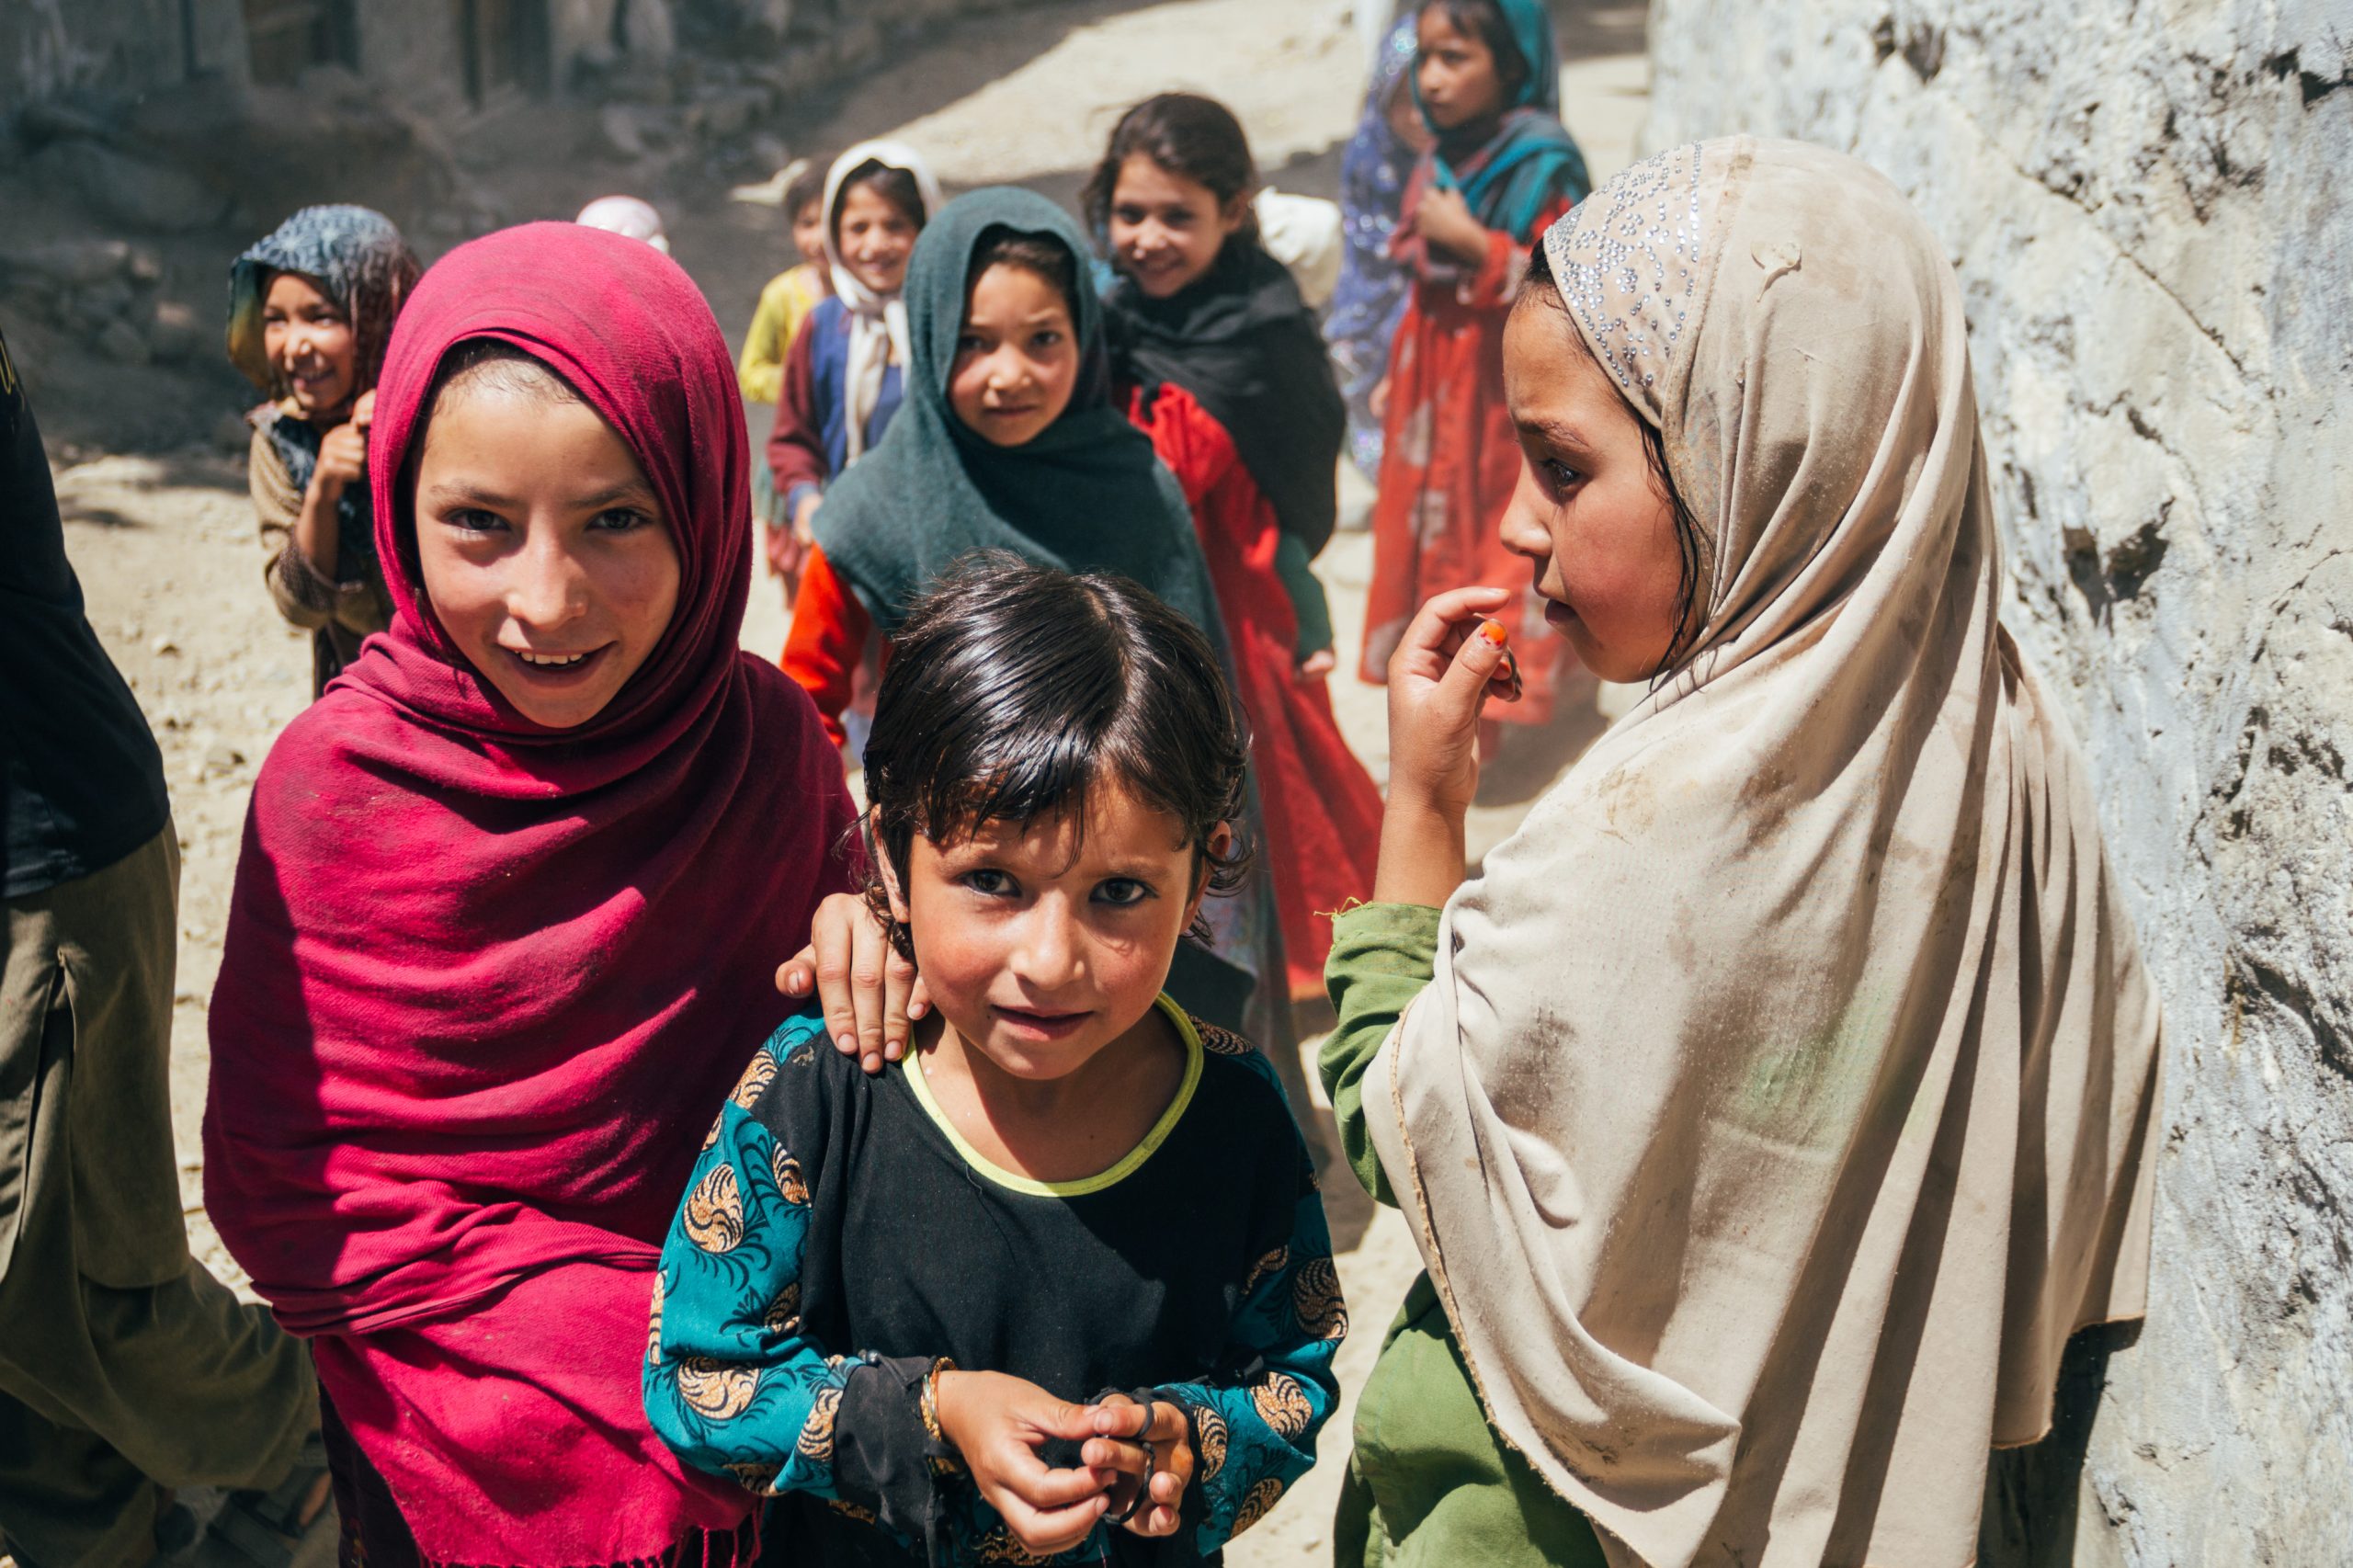 Little girls getting excited after seeing foreign people in their village in Hushe region of Skardu, Pakistan